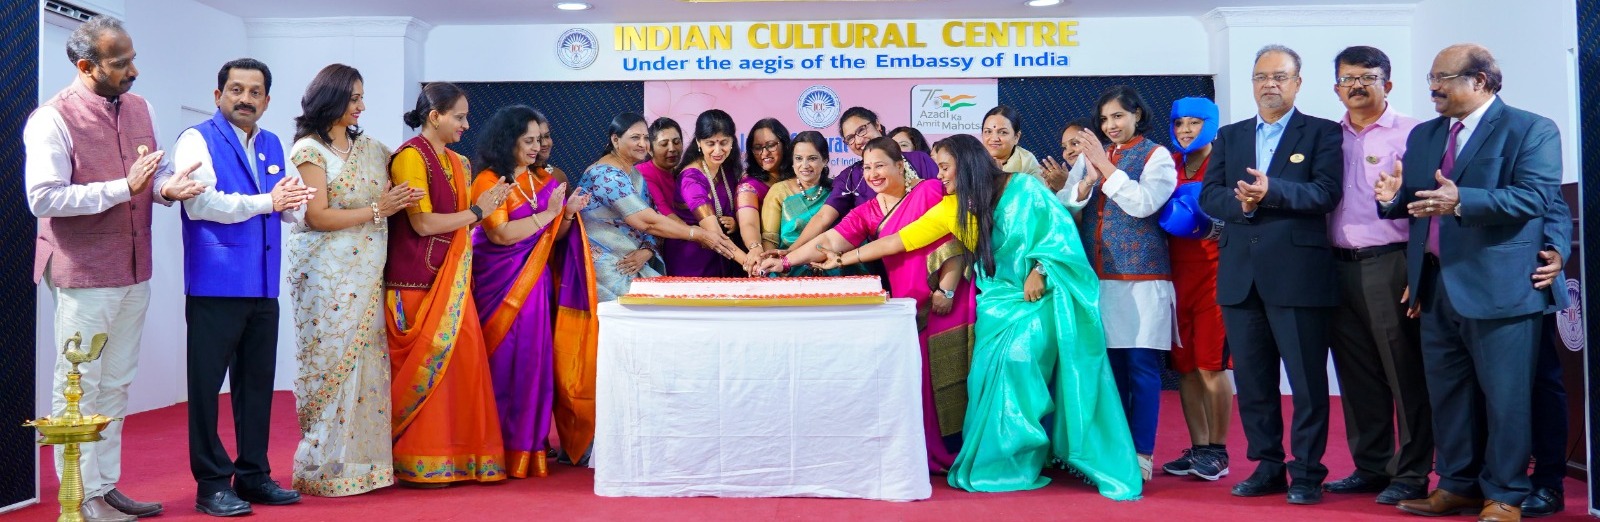 Indian Cultural Centre Women’s Forum inaugurated